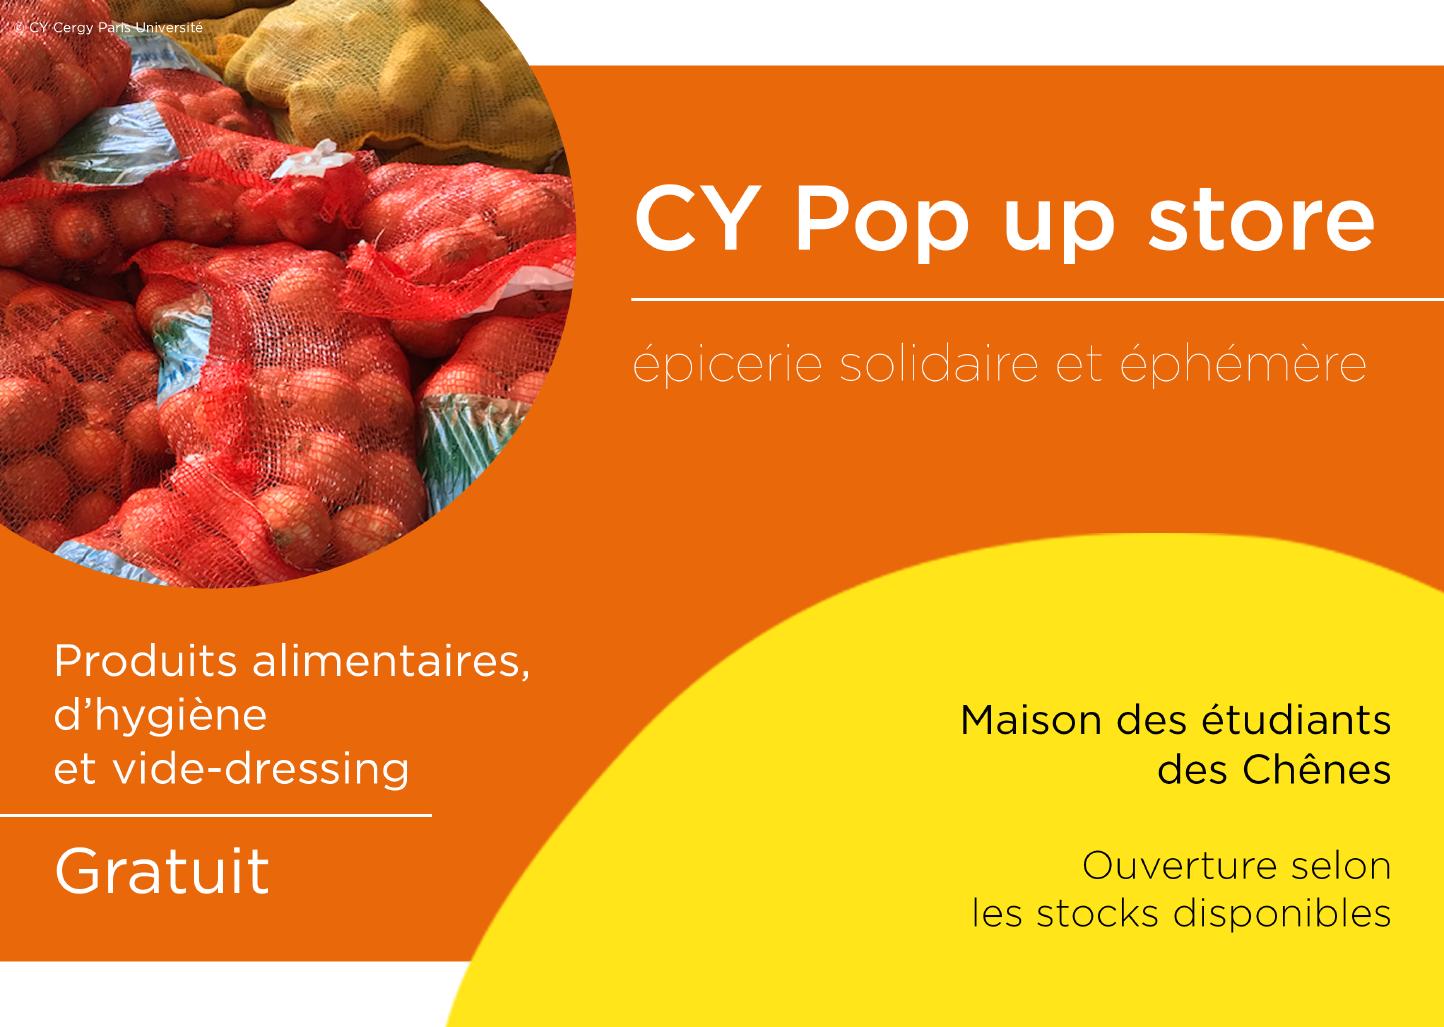 CY Pop up store